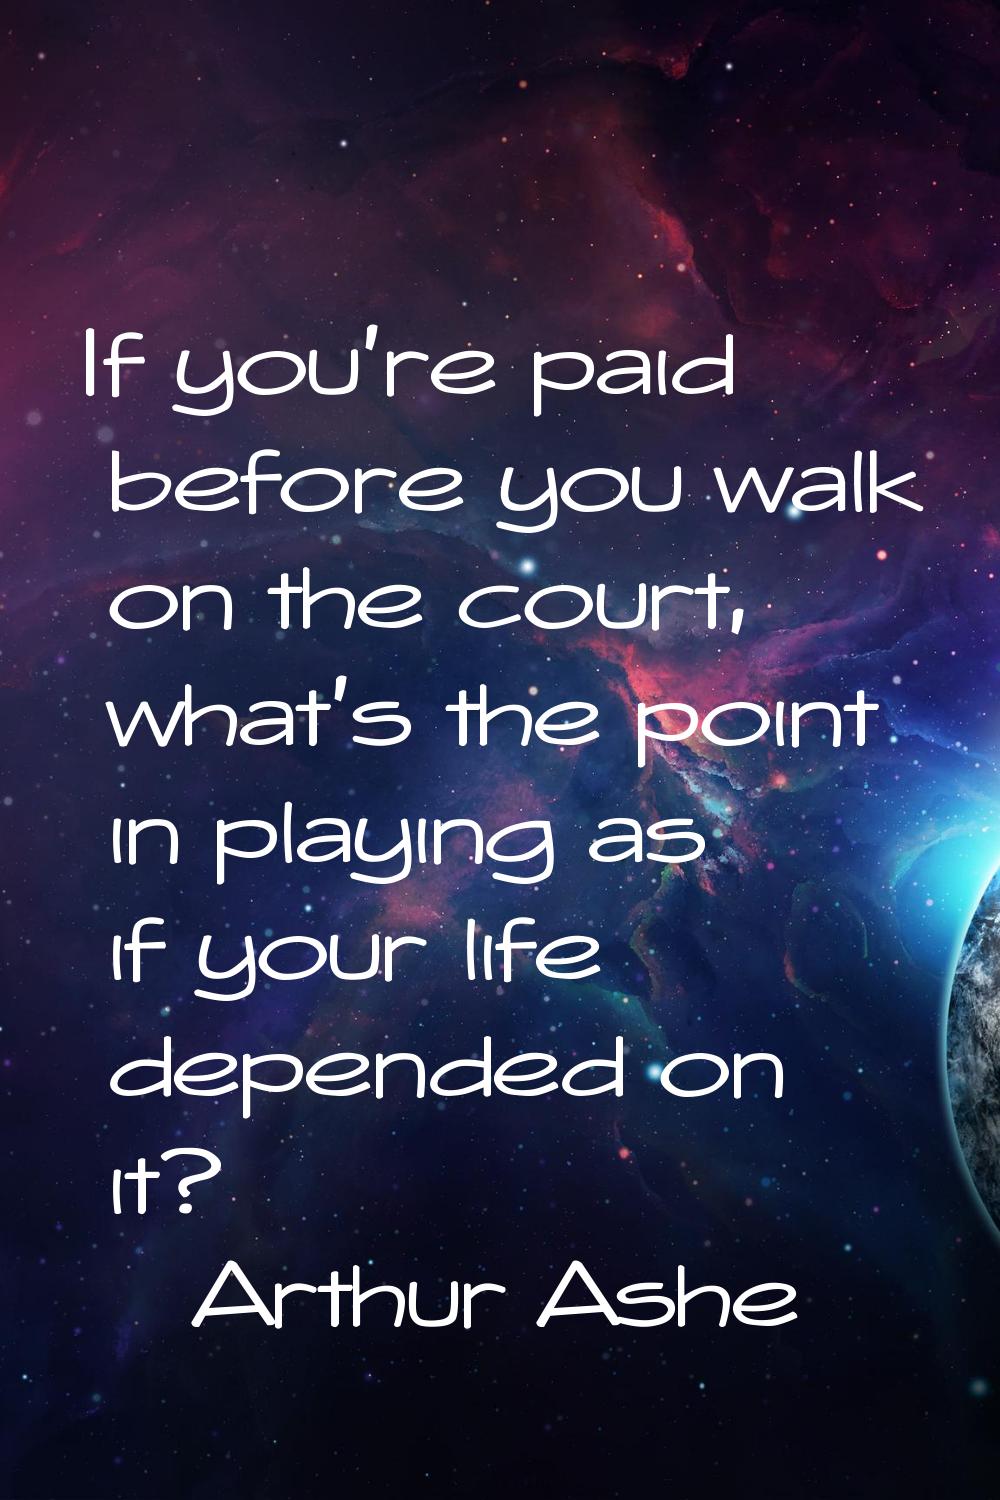 If you're paid before you walk on the court, what's the point in playing as if your life depended o